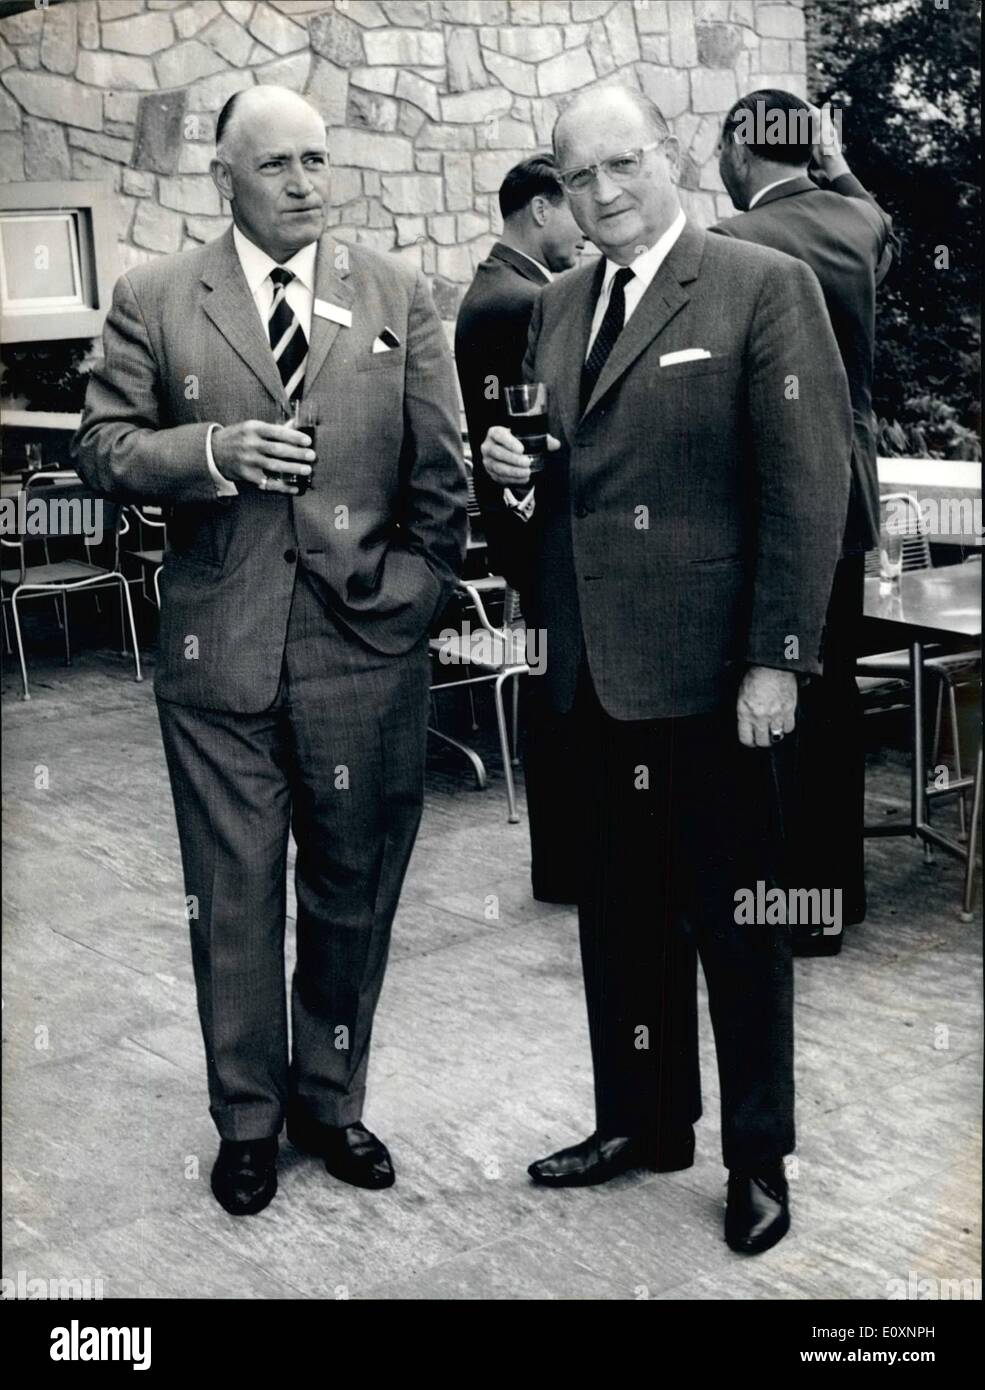 May 05, 1967 - Commander of an Army Corps Gygli (Chief of Swiss General Staff) (left) and General Speidel (right) of the Federal Republic of Germany. At a meeting of 50 generals & experts from Western Europe at the Gottlieb Duttweiler Institute at Reuschlikon where the discussed '''Small powers and the security of Europe' Stock Photo